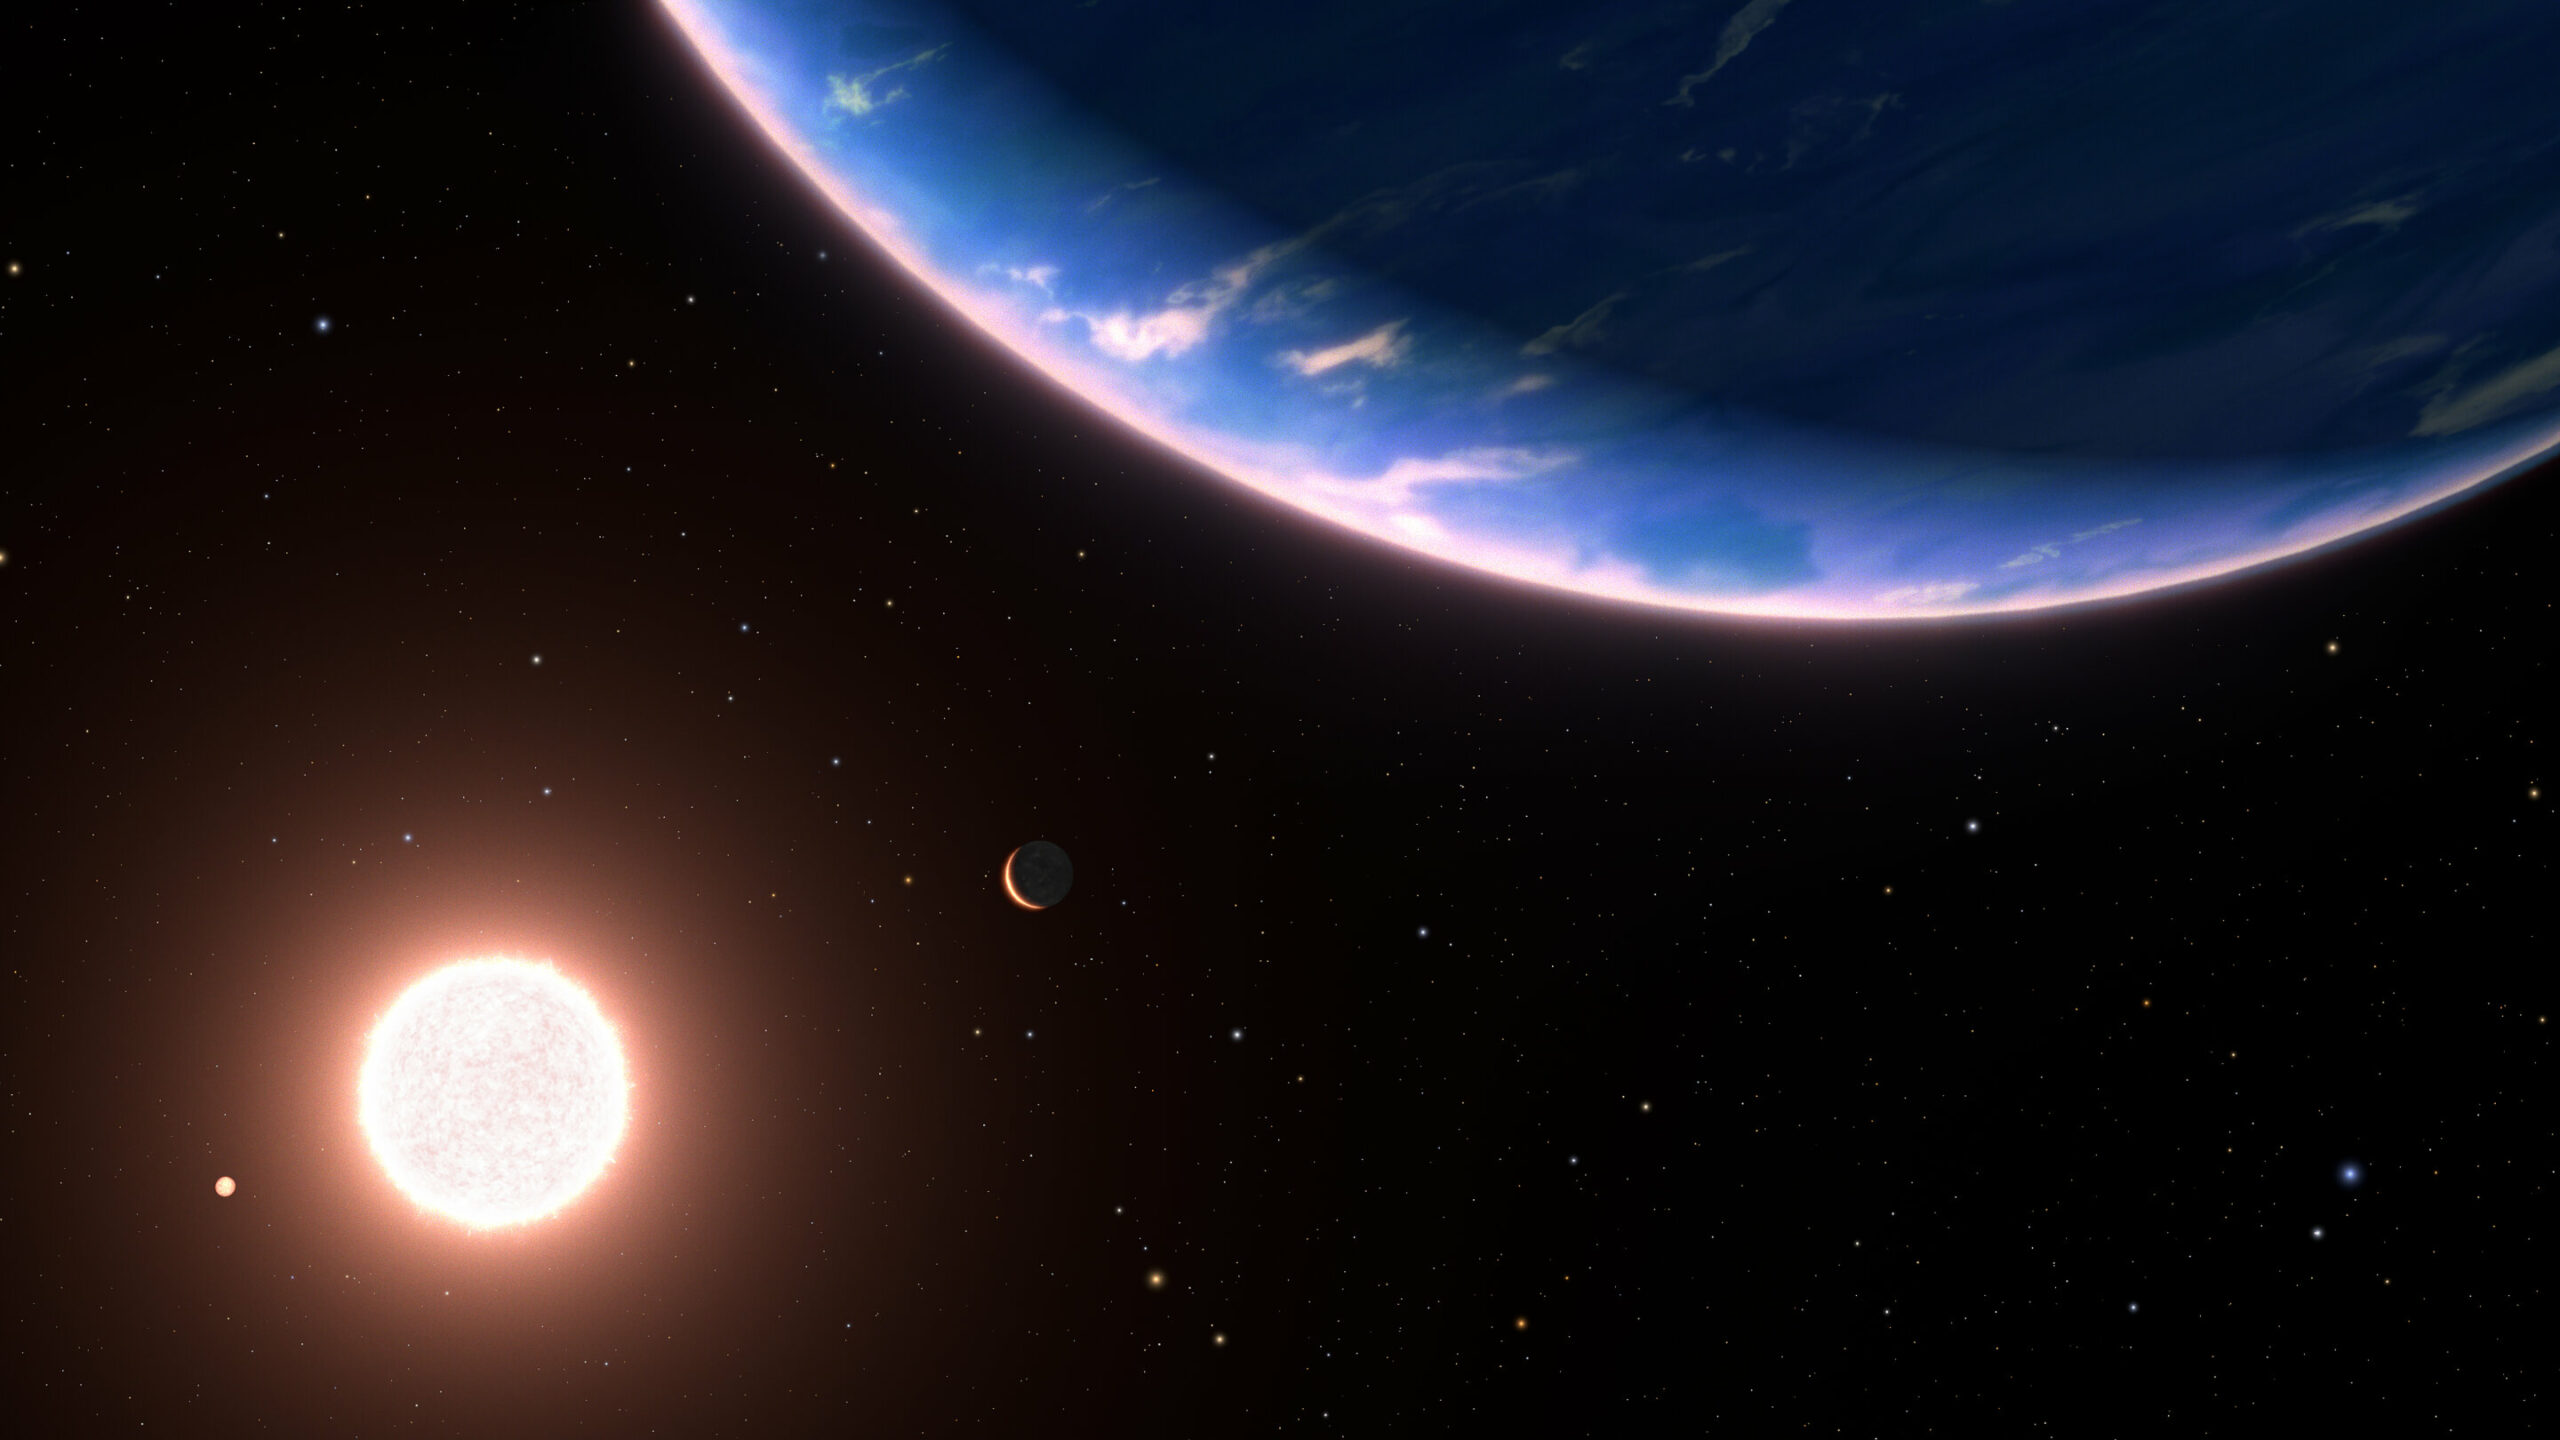 Hubble Discovers Water Vapor in the Atmosphere of a Compact Exoplanet